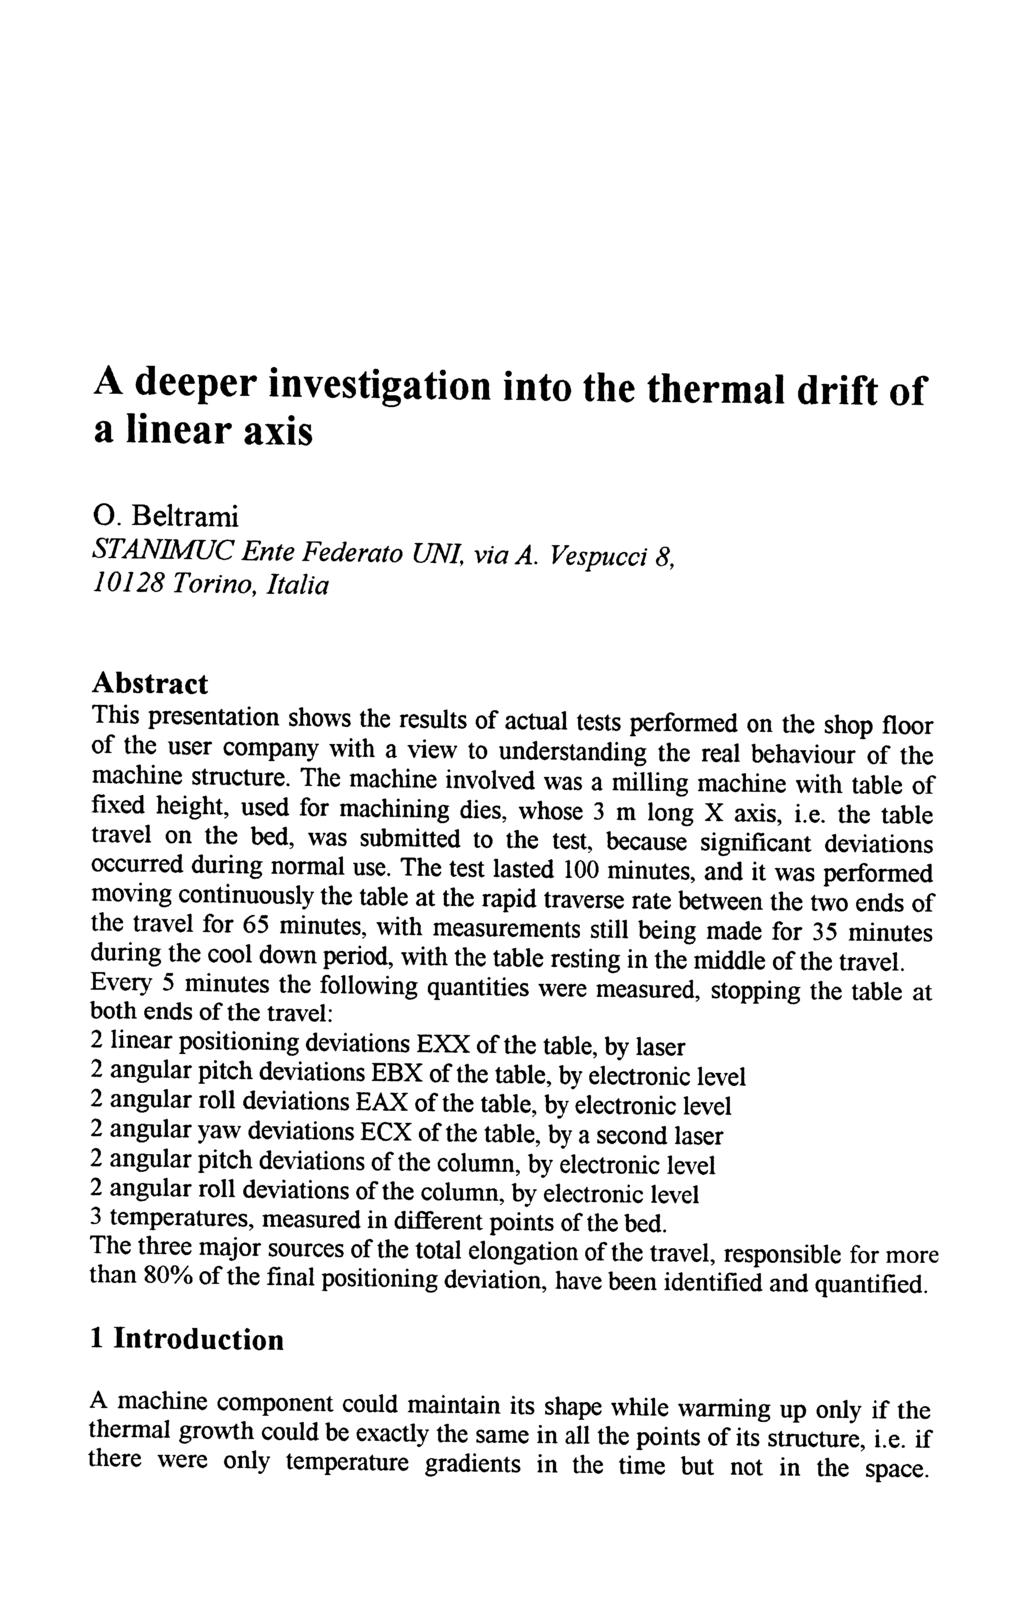 A deeper investigation into the thermal drift of a linear axis O Beltrami STANIMUC Ente Federate UNI via A.